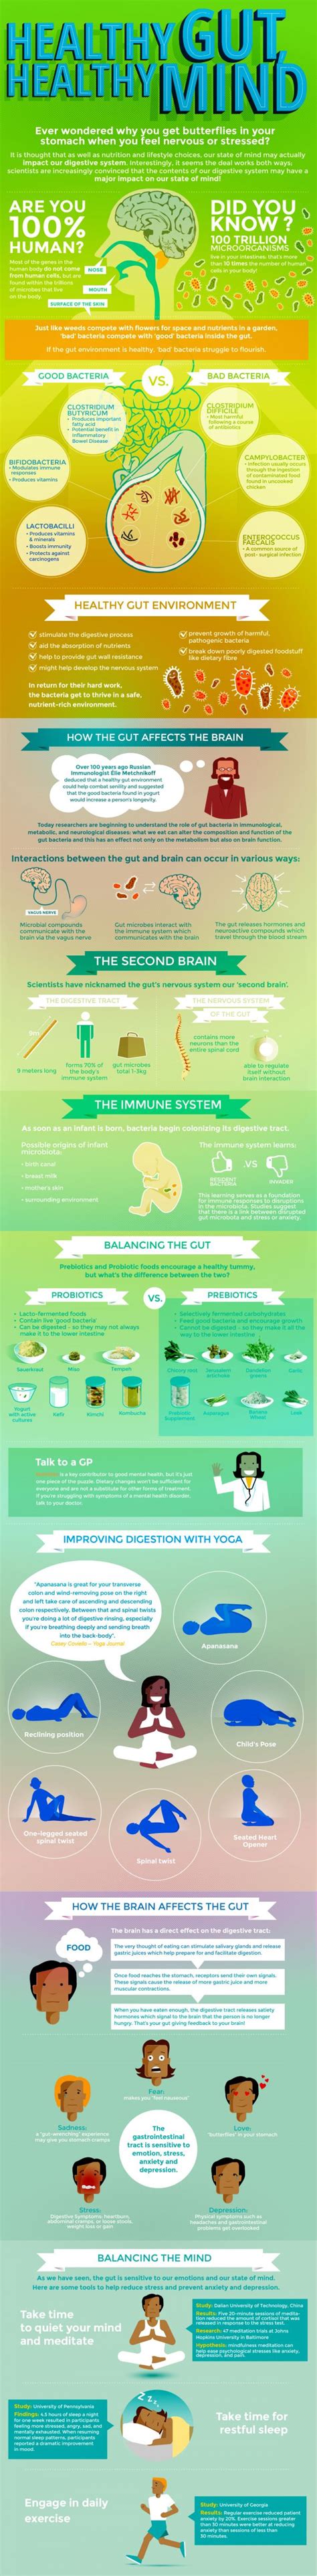 How Gut Bacteria Affects The Brain And Body Infographic